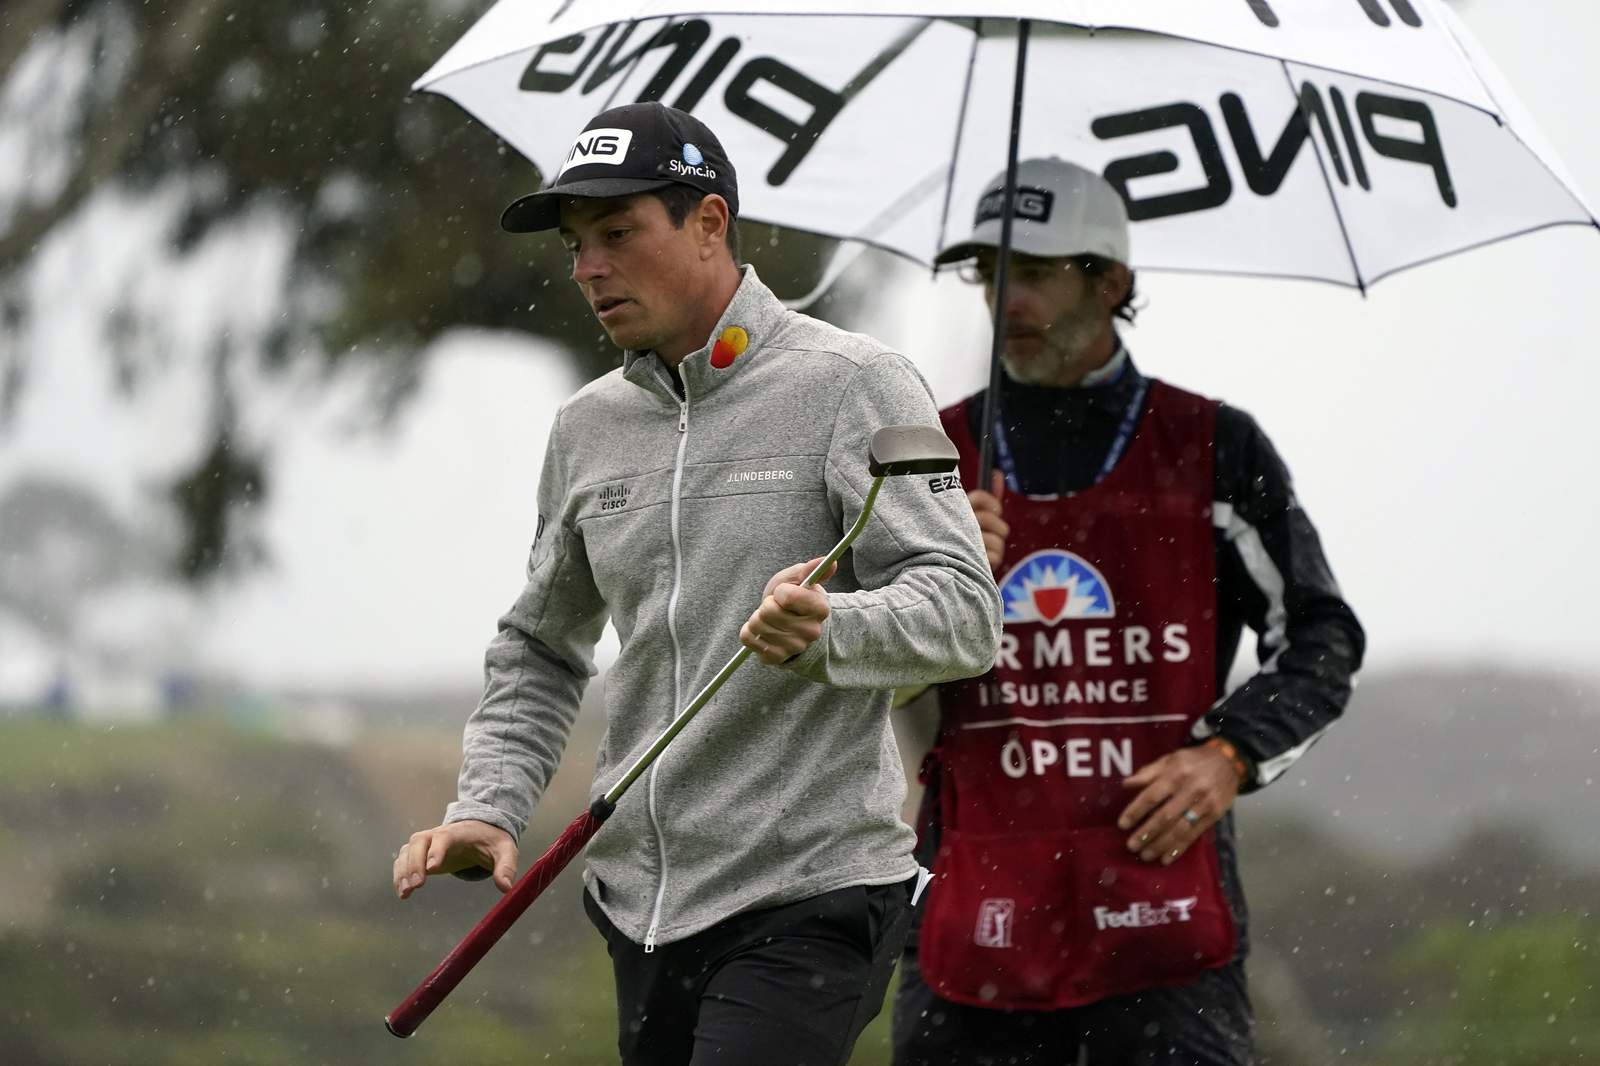 Viktor Hovland vaults into Farmers lead at wet Torrey Pines